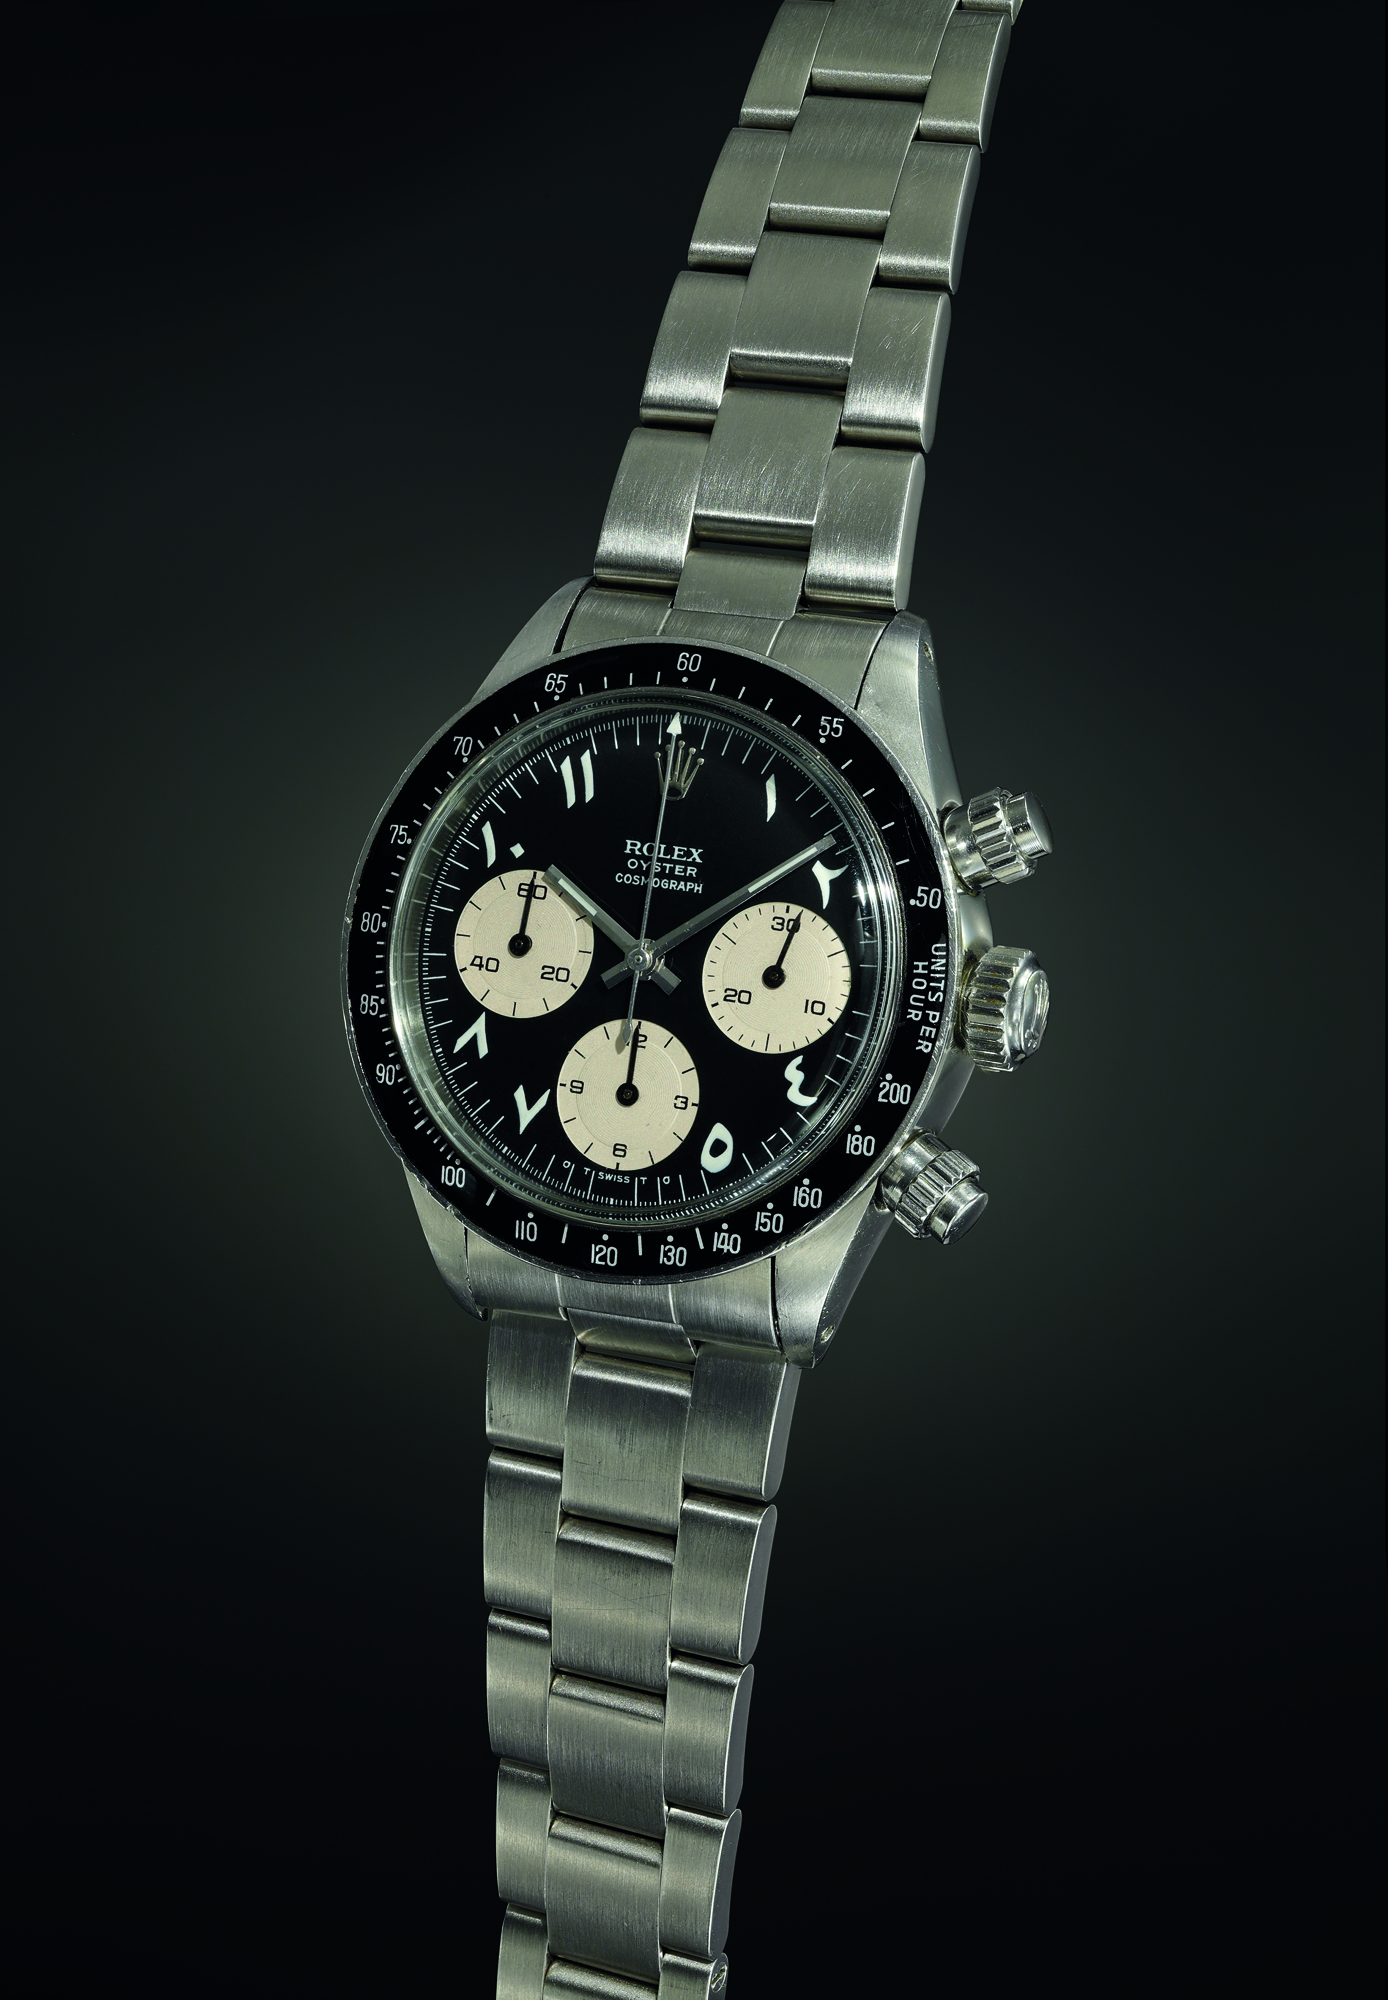 An exquisite, important and most probably unique chronograph wristwatch with black dial displaying white Arabic-Indic numerals, and bracelet. Realised CHF 1,932,500